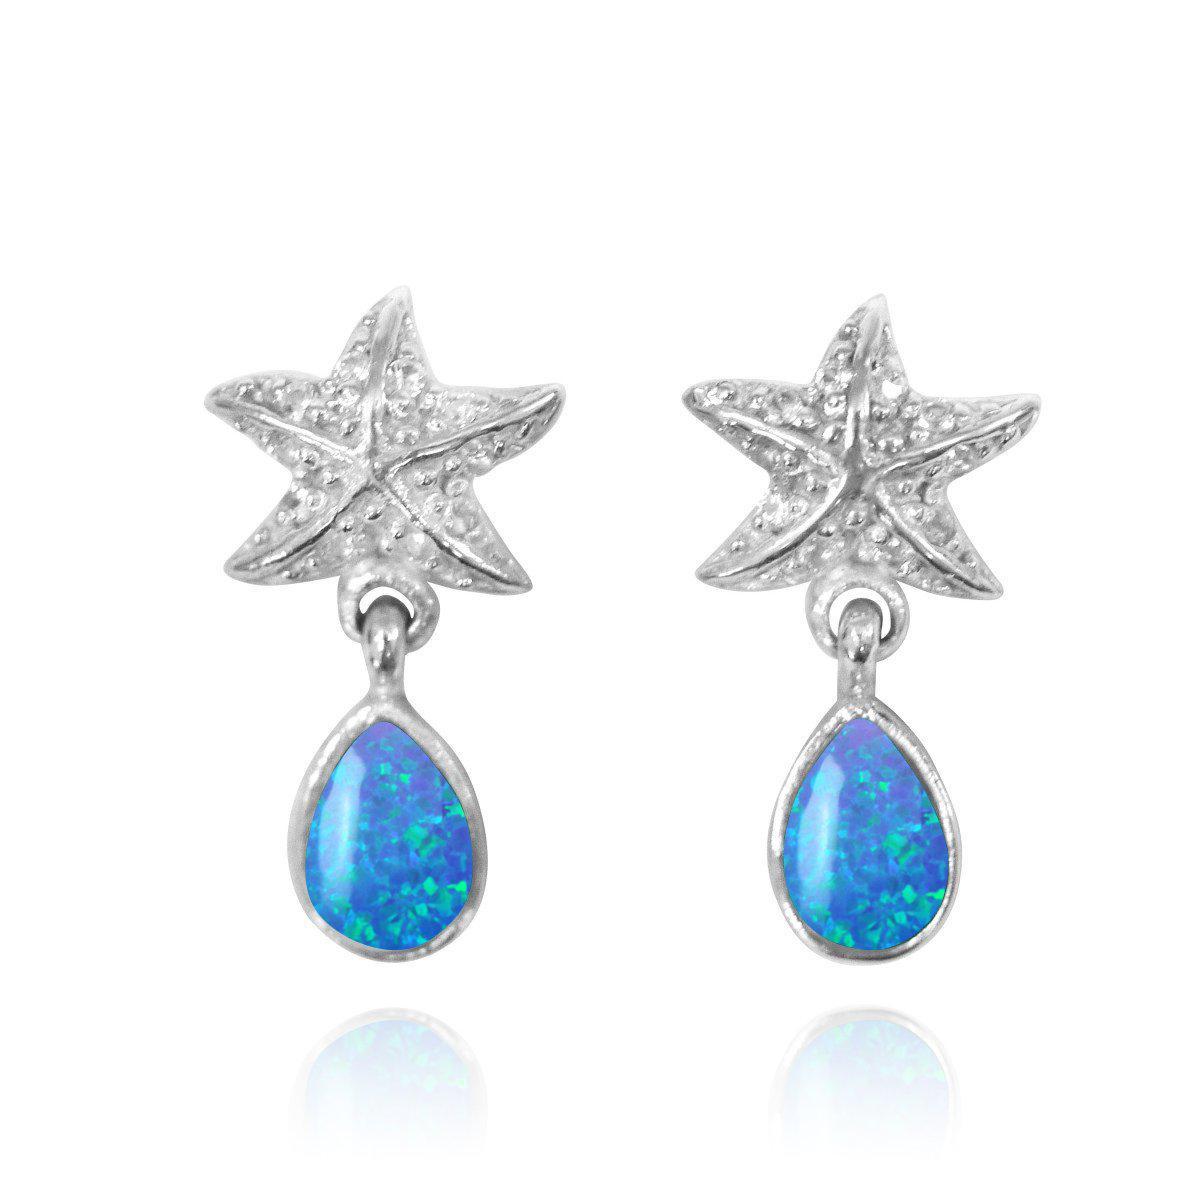 Sterling Silver Starfish Stud Earrings with Round Blue Opal and Teardrop White Topaz